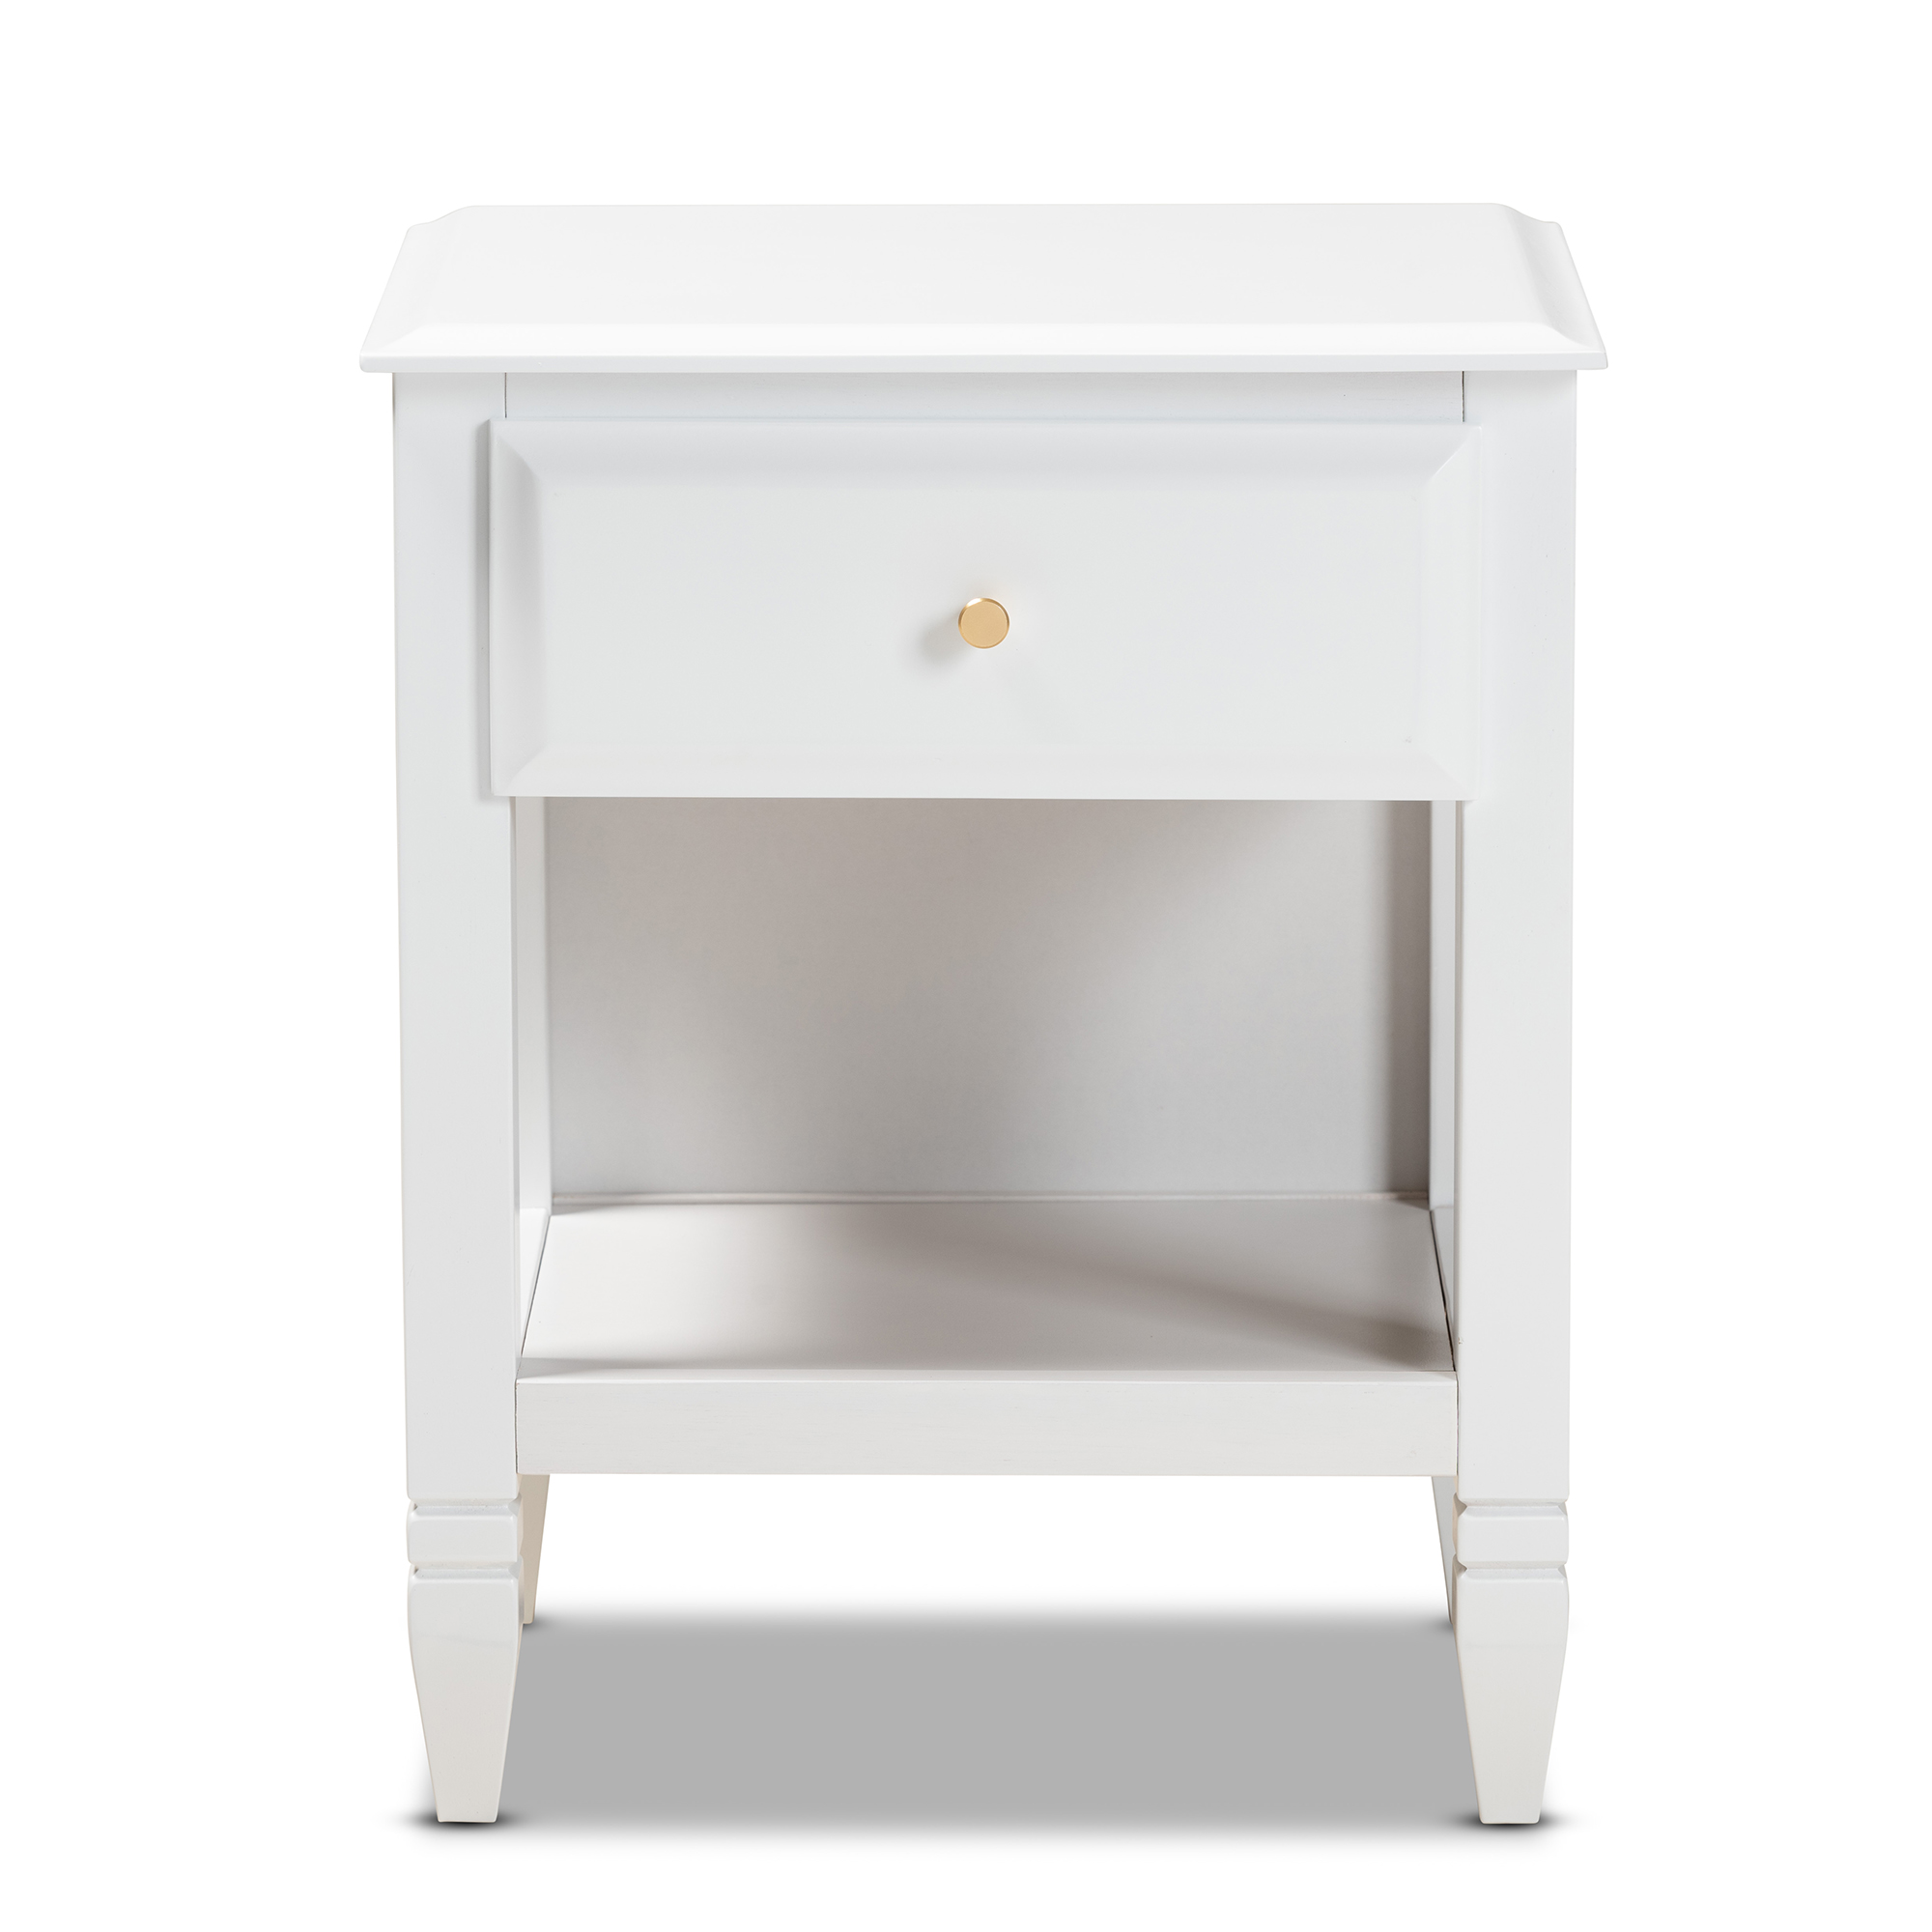 Baxton Studio Naomi Classic and Transitional White Finished Wood 1-Drawer Bedroom Nightstand - image 4 of 9